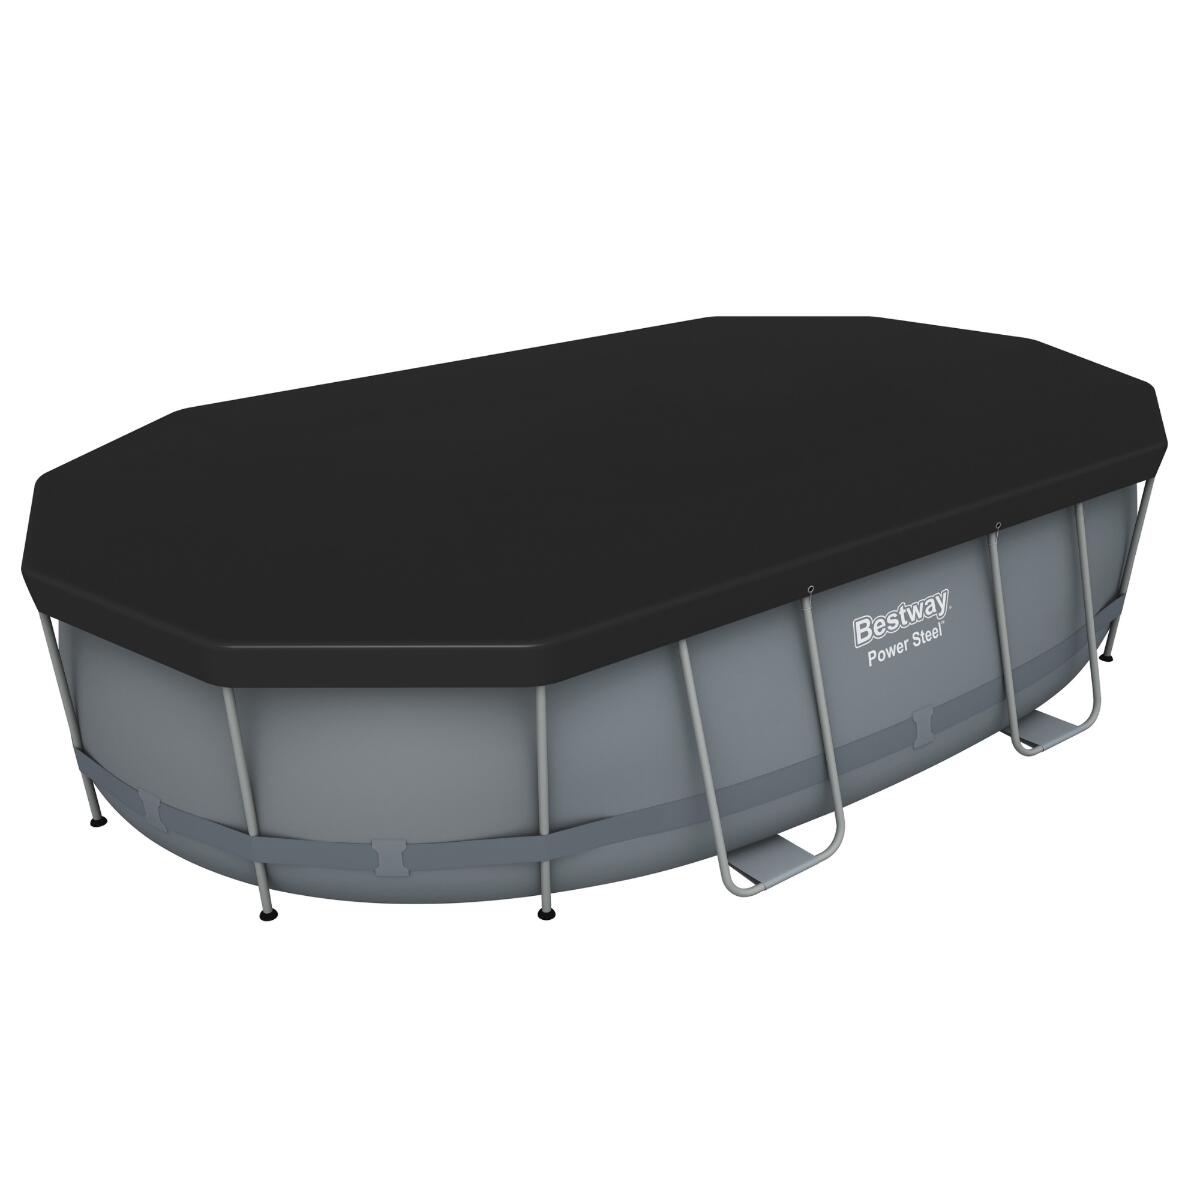 Bestway 16ft x 10ft x 42" Oval Power Steel Above Ground Pool 5/7